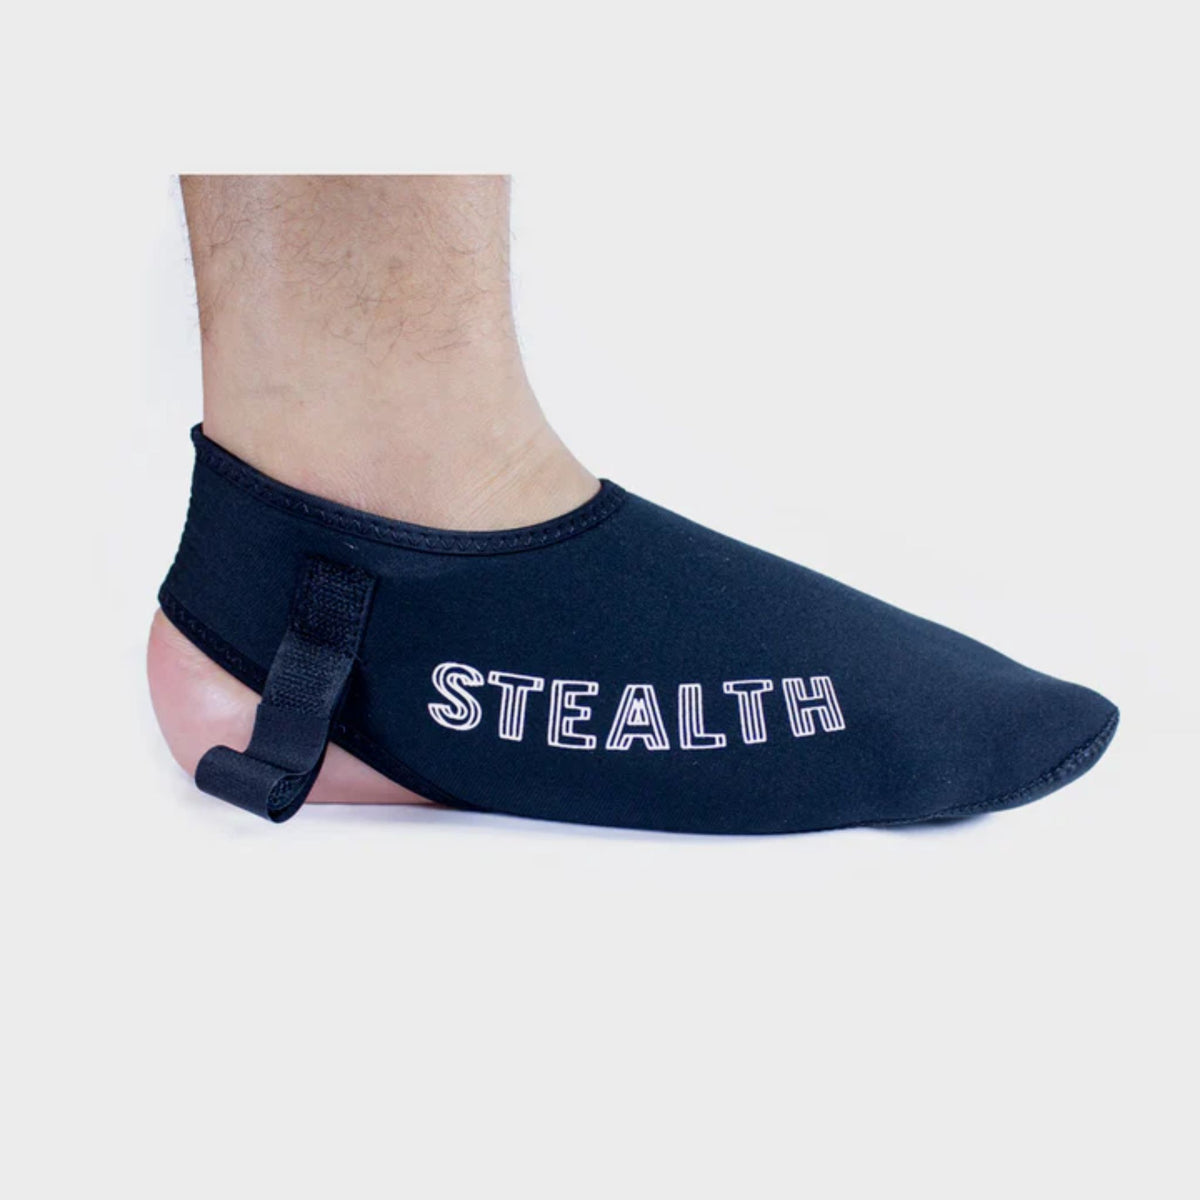 Stealth_Ankle_bootie_01_3d0b65aa-3f09-4ff3-8f84-a4939d31cf60